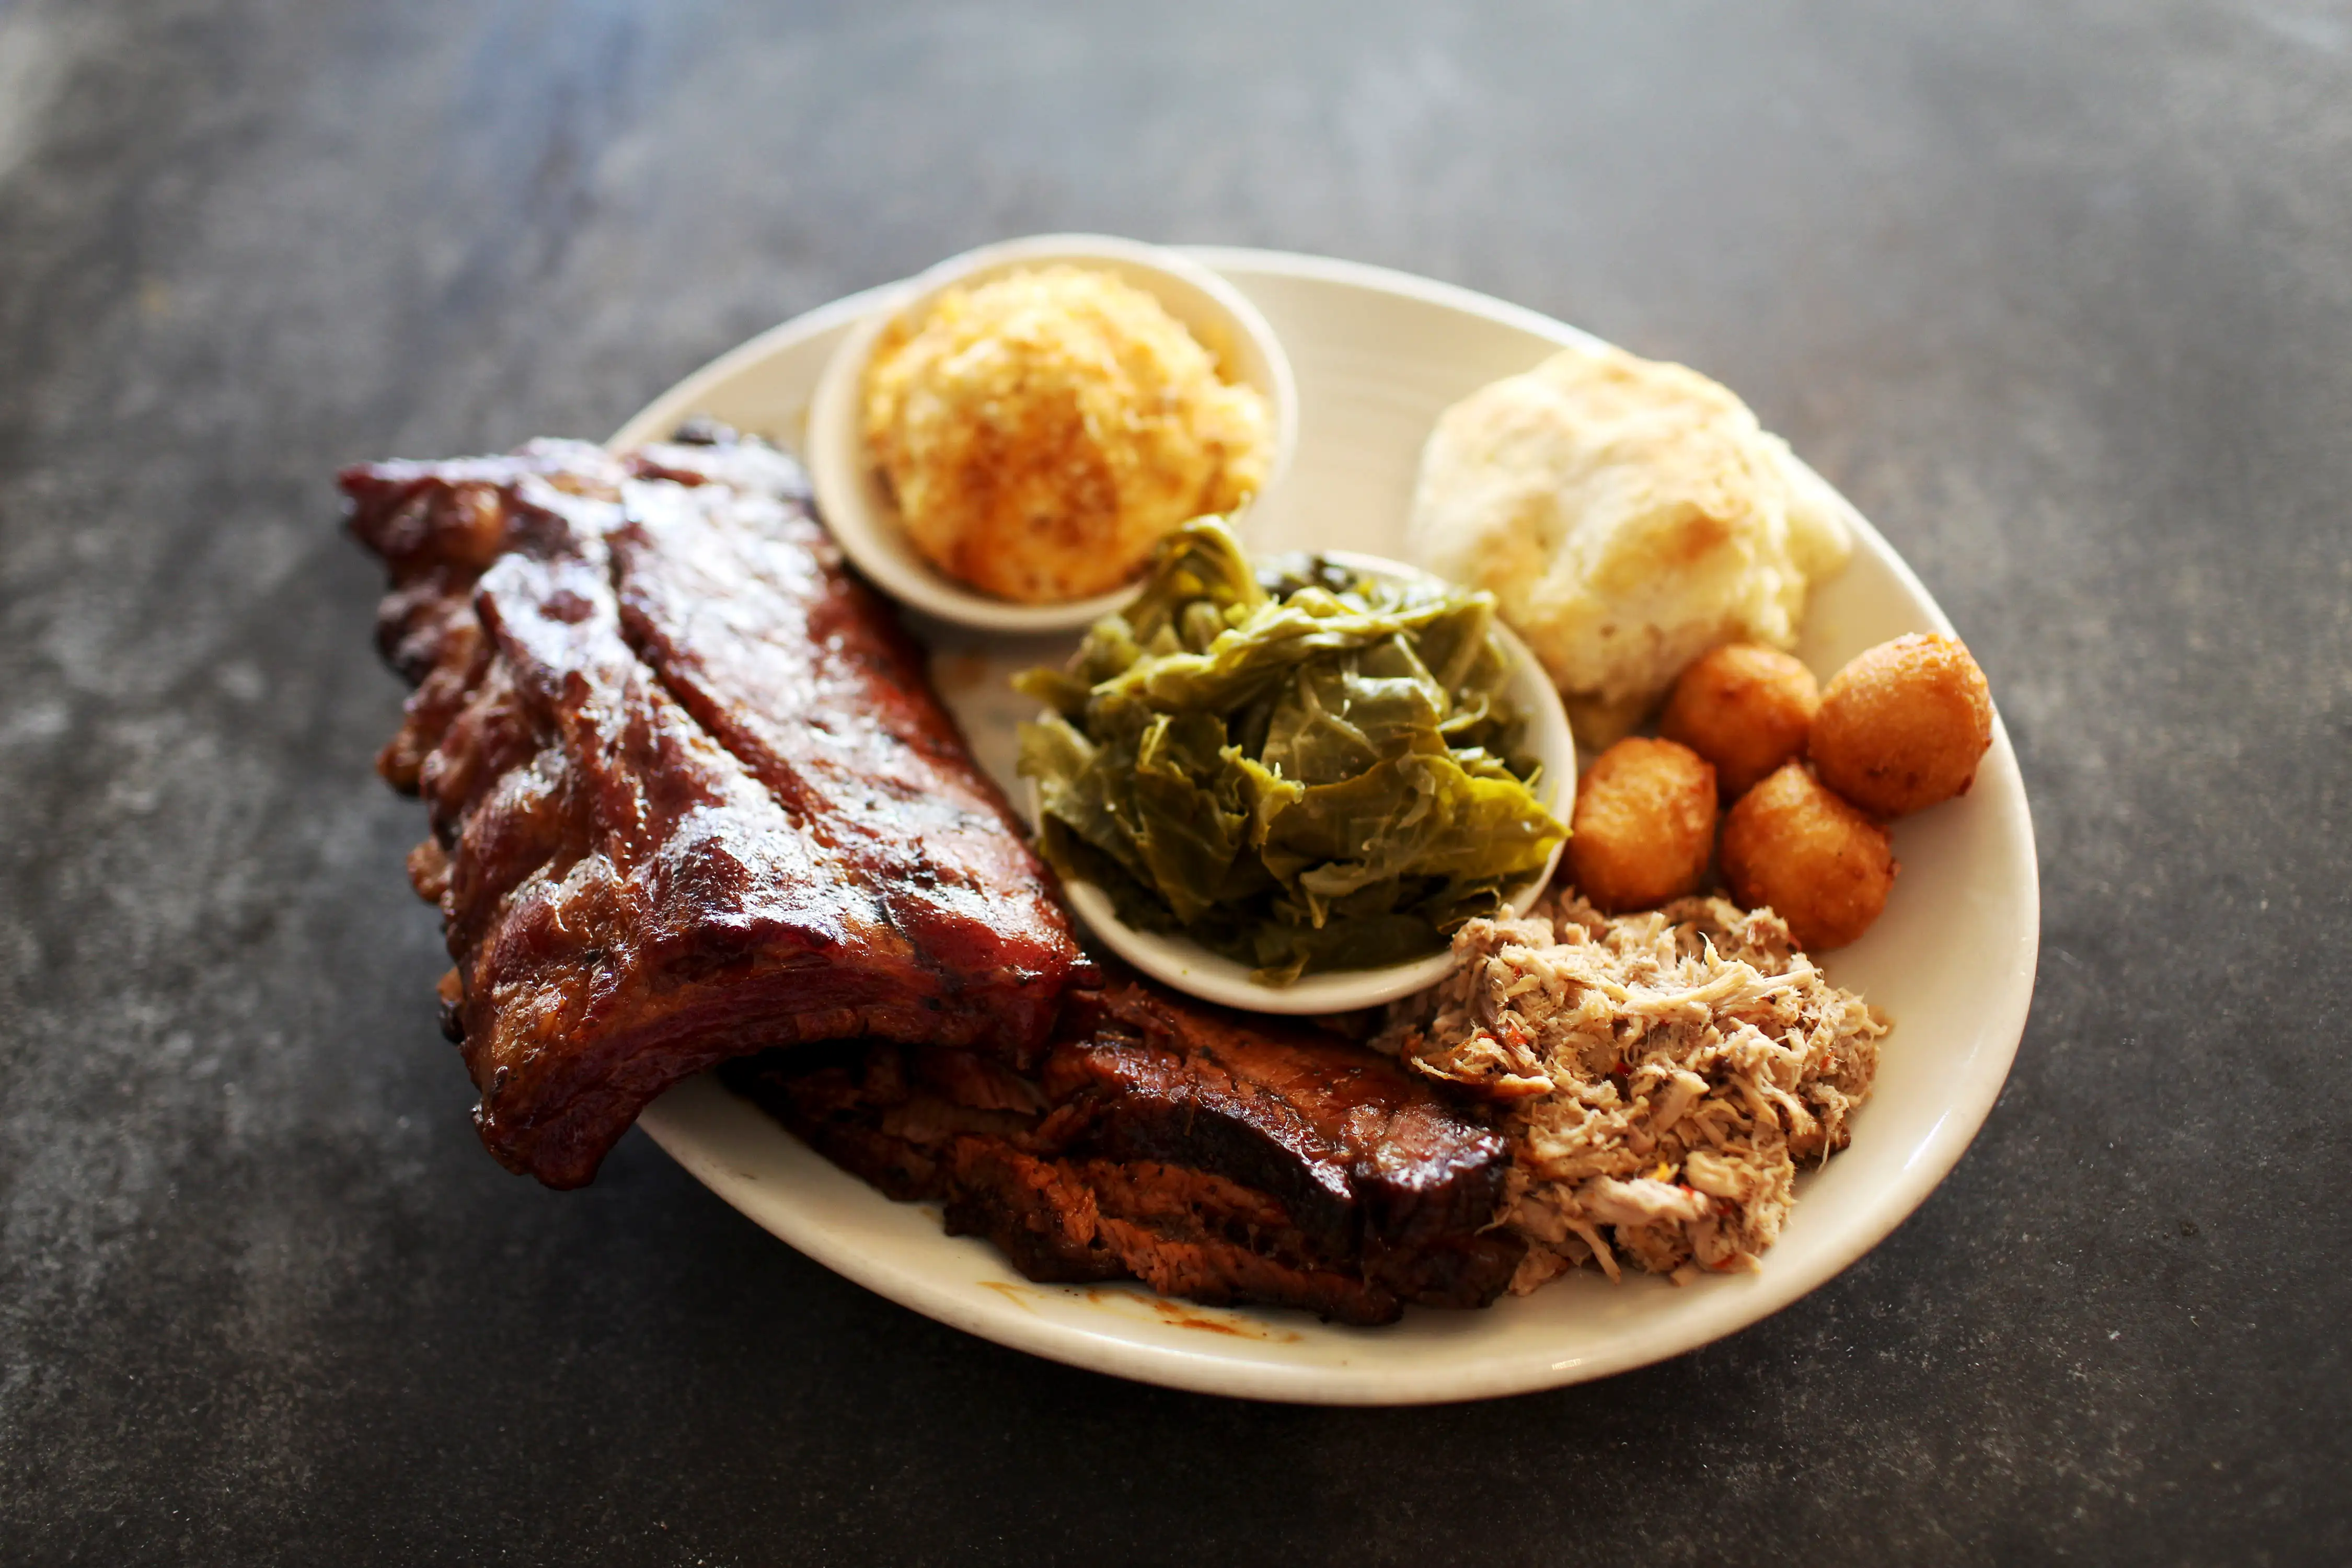 A combo plate of barbecue specialties at the Pit in Raleigh, N.C.